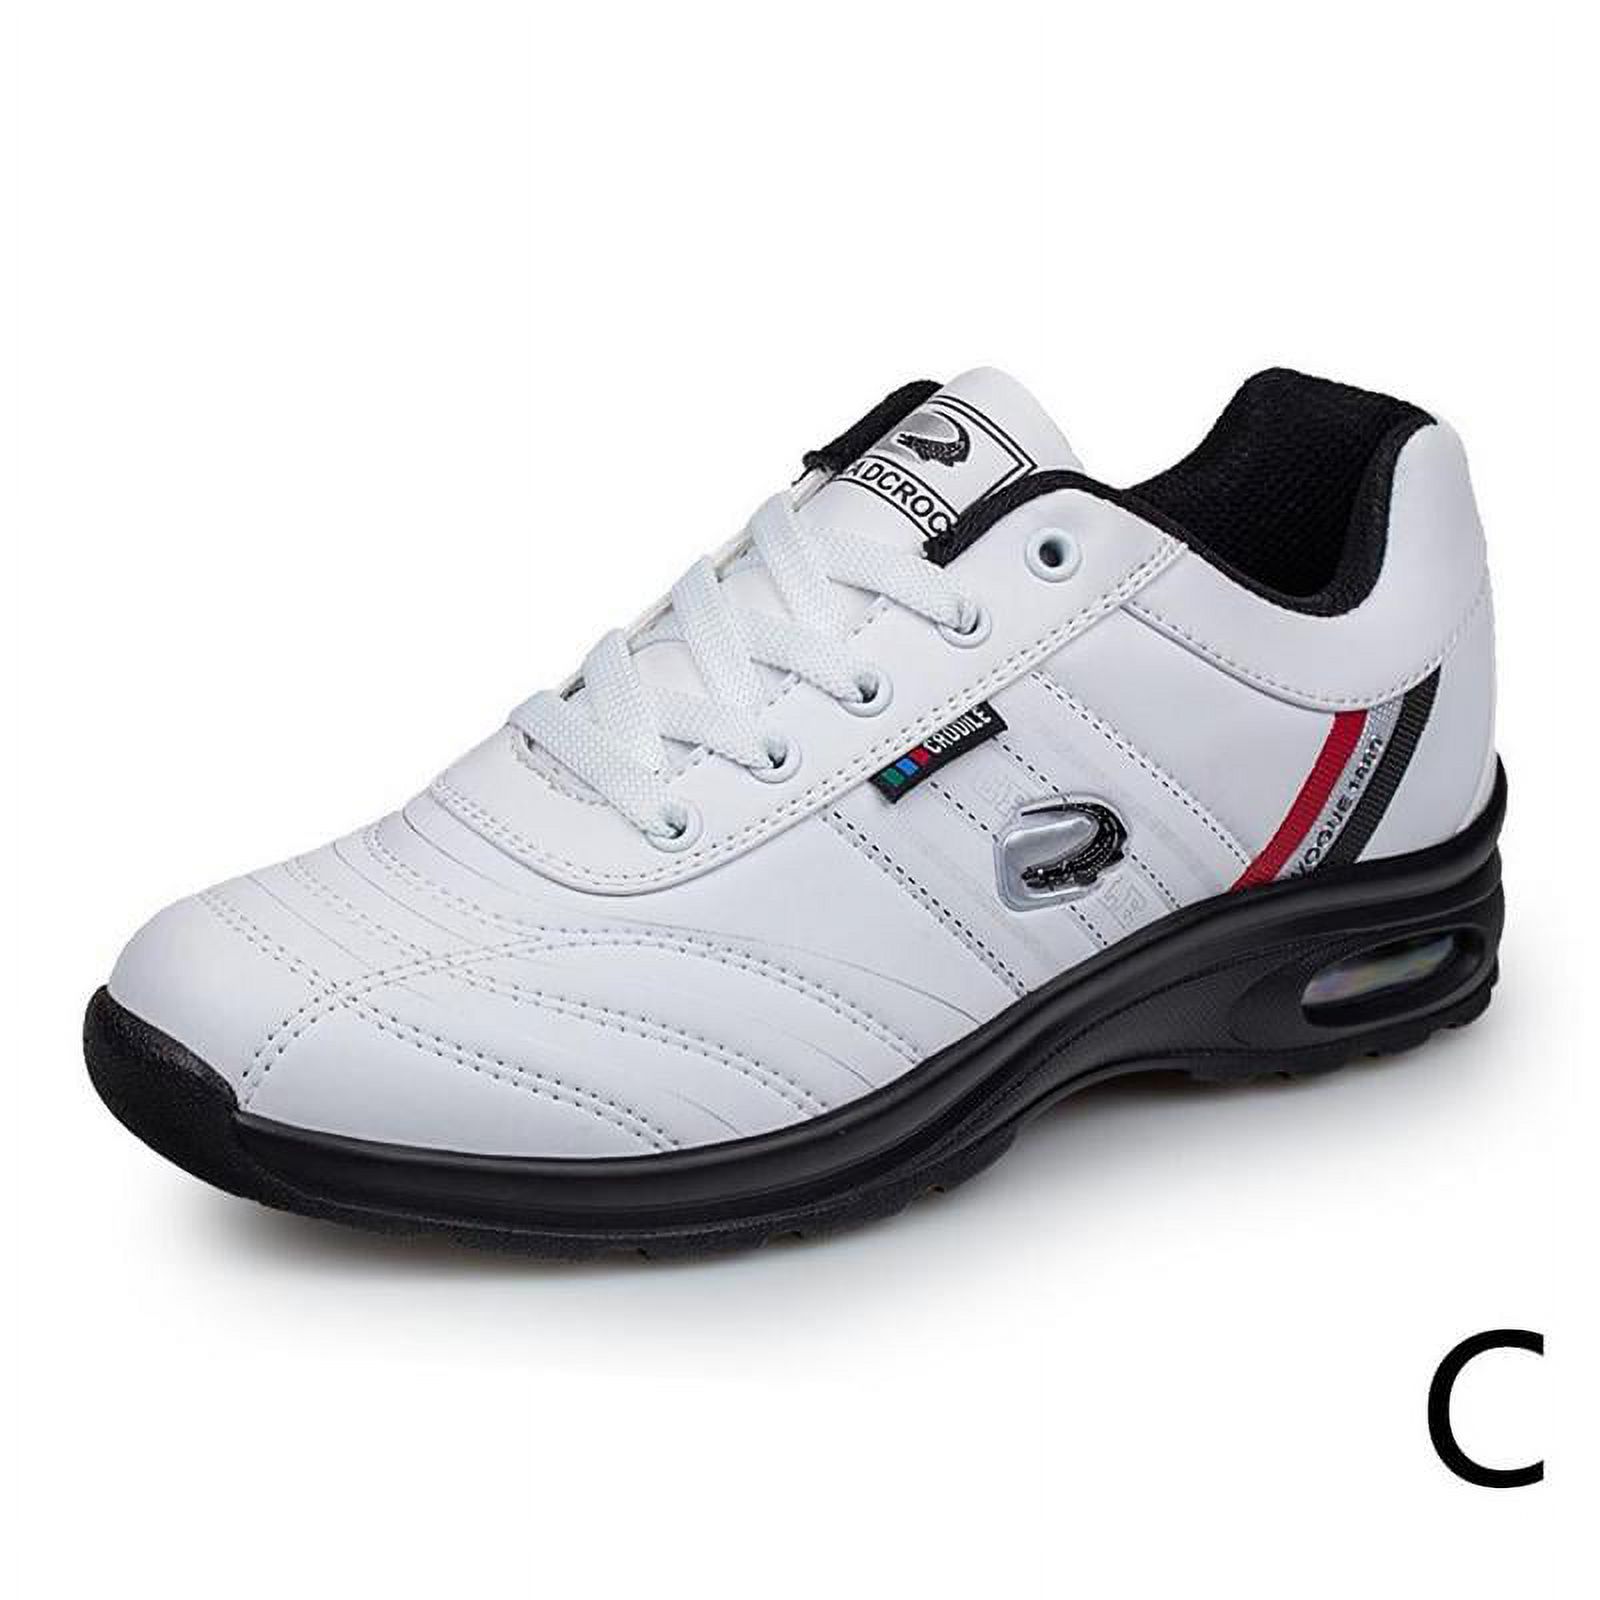 New Men's Golf Shoes Lightweight Men Shoes Golf Waterproof Anti-slip Shoes Golf Shoes Breathable Sports Shoes G4D9 - image 1 of 8